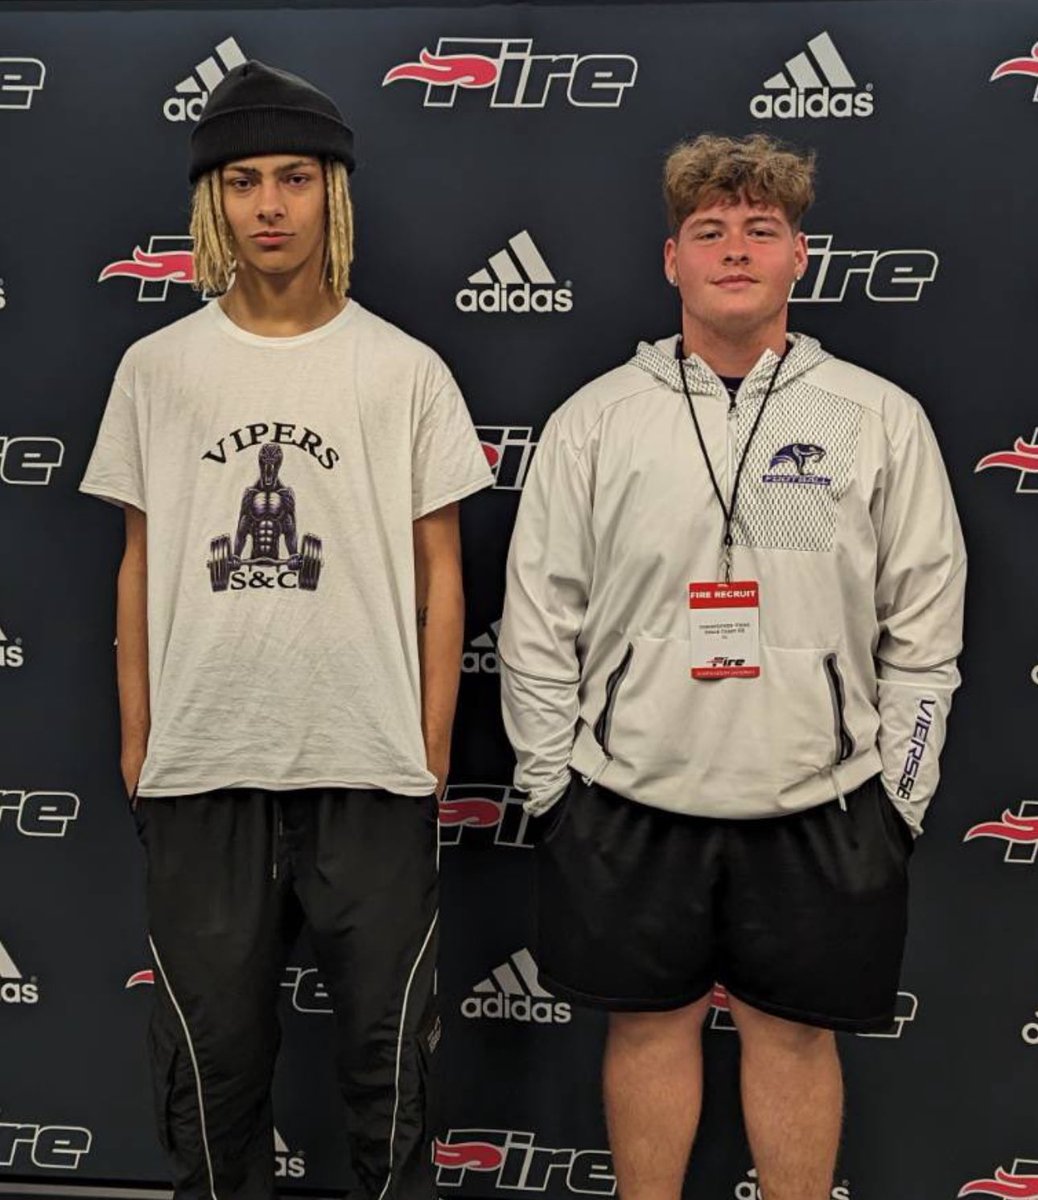 Had a great time at @SEUFireFootball Junior Day with @CoachHenzmann @444LXRE444. Thank you for the invitation! @CoachJakeOwens9 @K_Davis01 @coachkhalilp @CoachHeldreth @schsviperfb